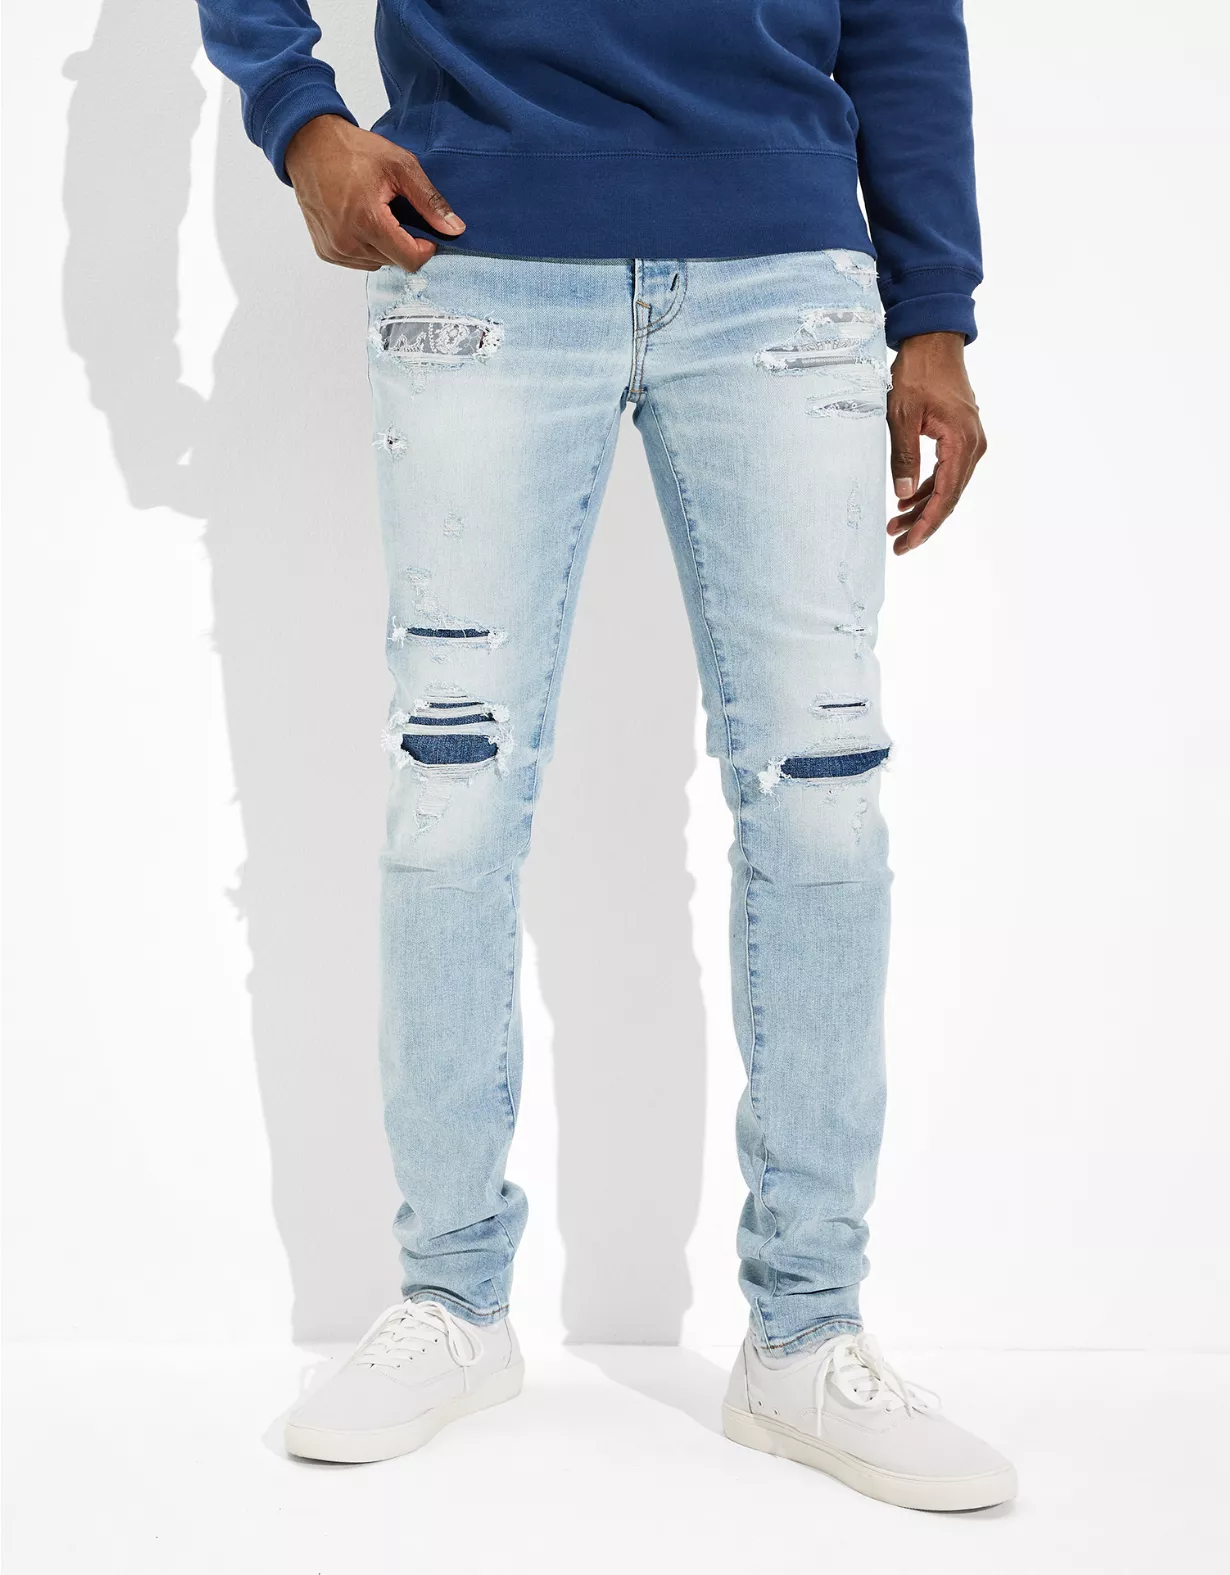 AE AirFlex+ Temp Tech Patched Stacked Skinny Jean